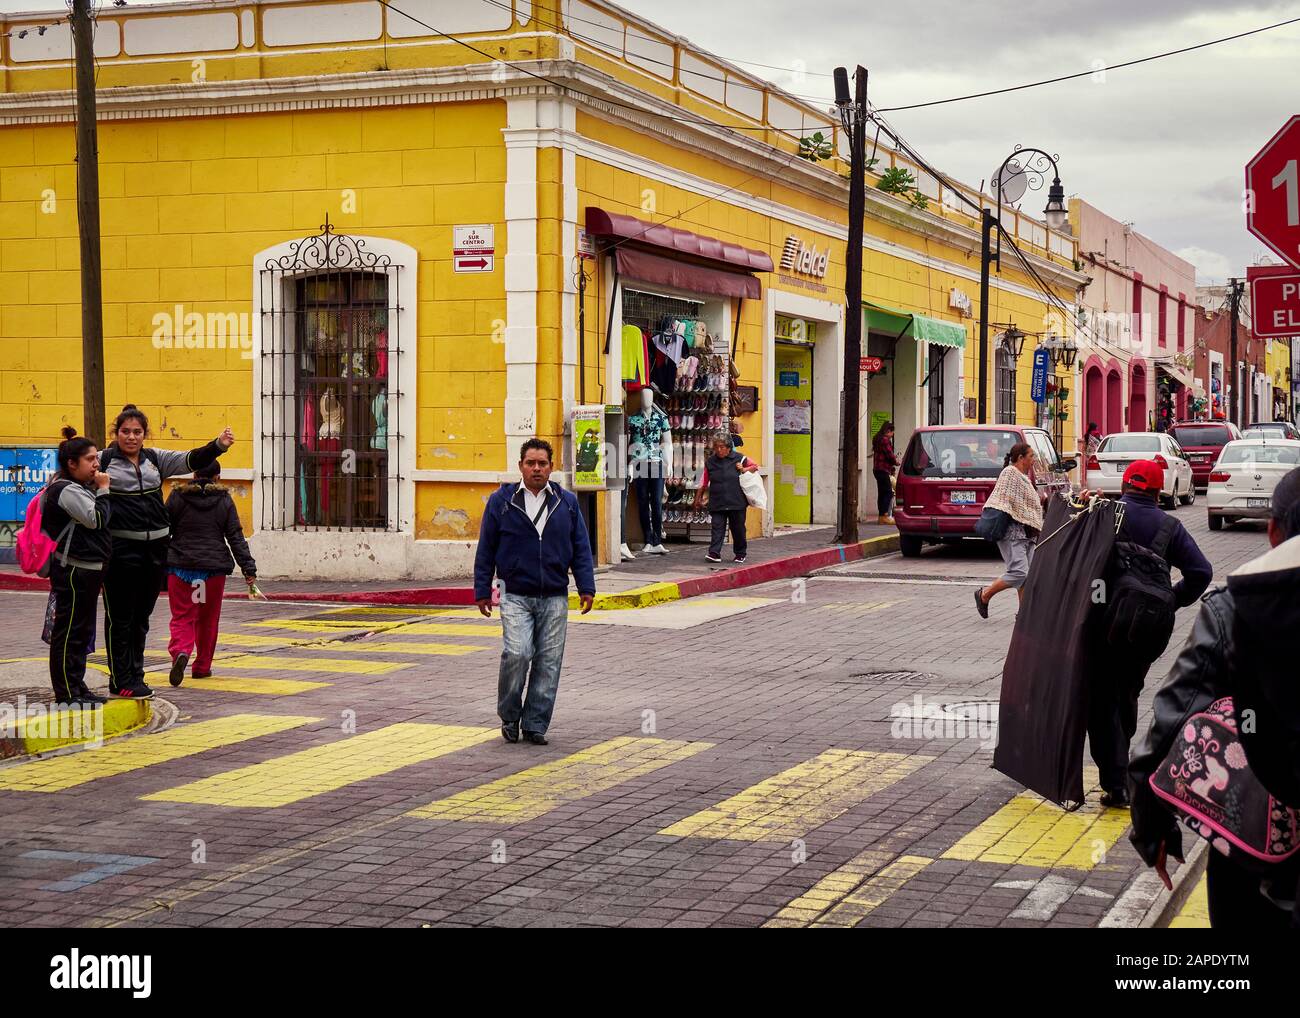 San Pedro Cholula, Mexico, October 17, 2018 - Yellow pedestrian crossing with people walking and man in the middle of the street in San Pedro Cholula Stock Photo